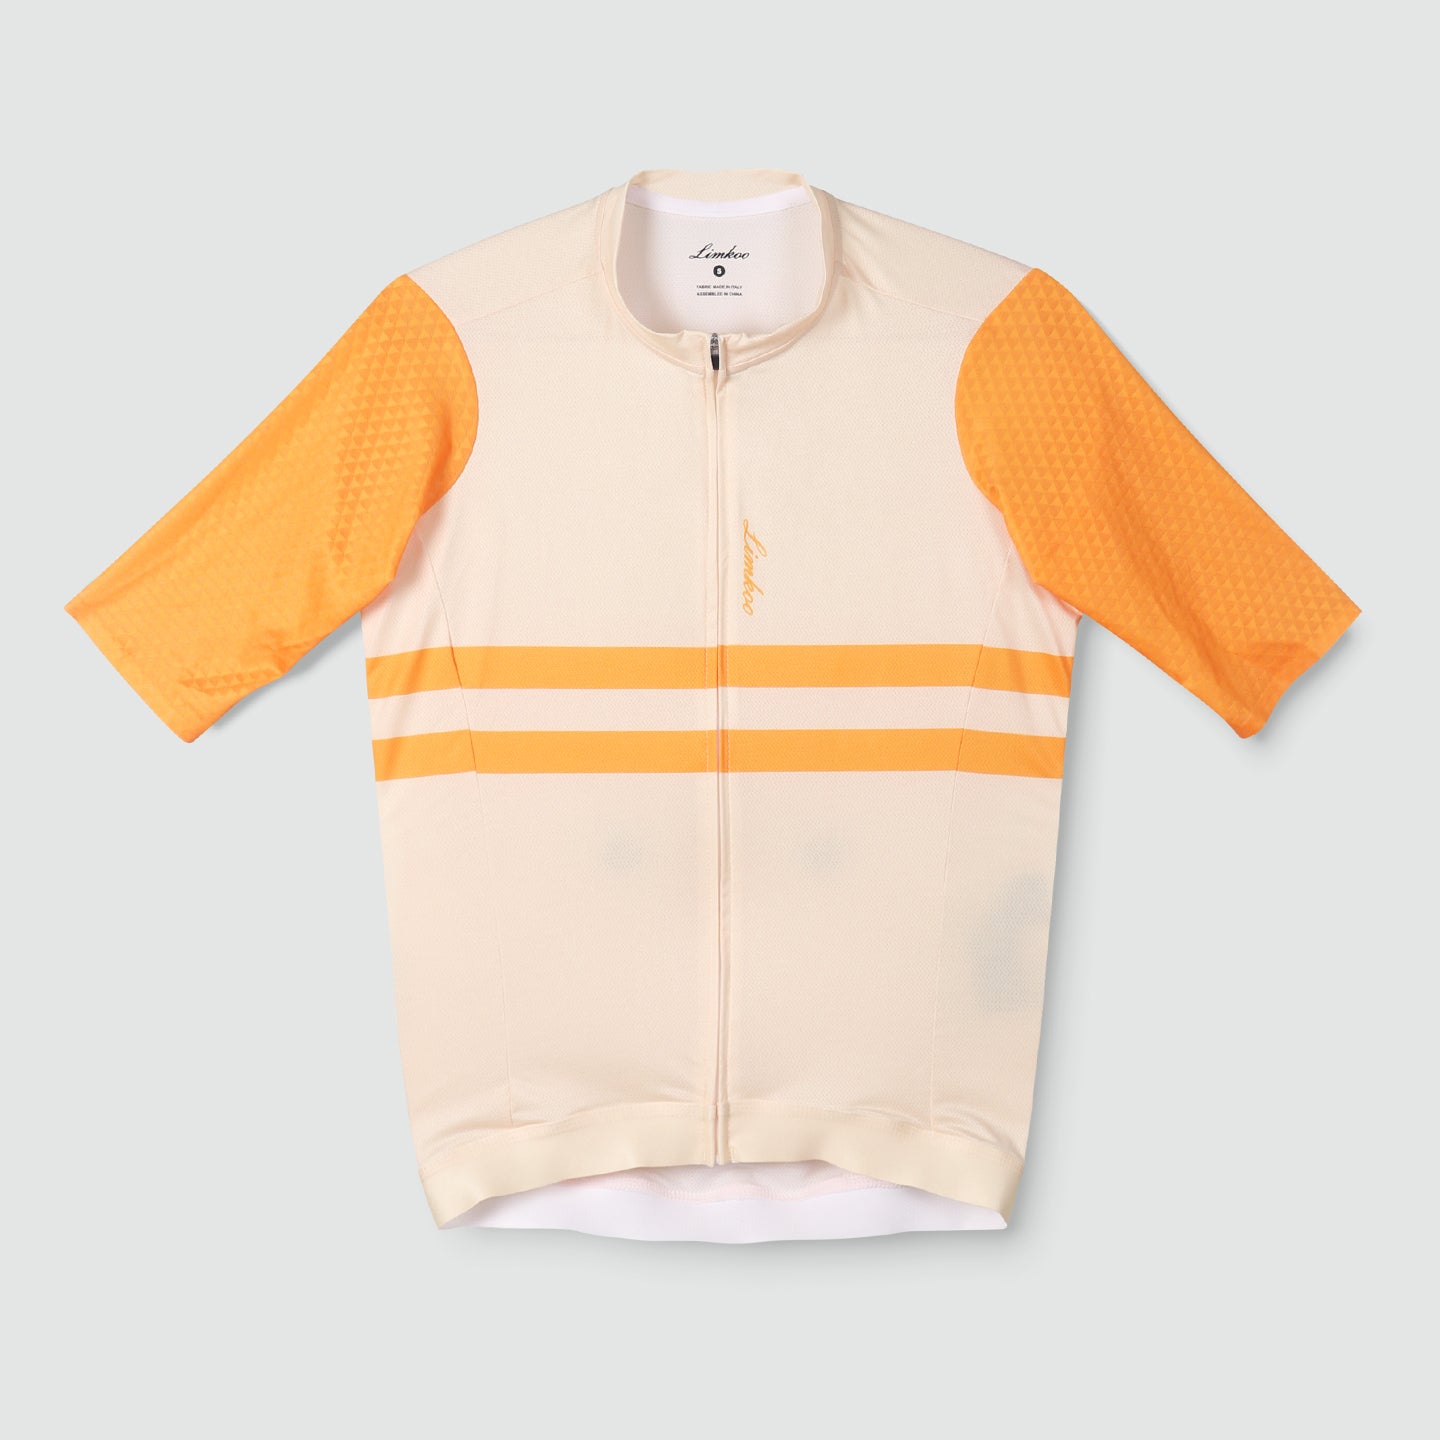 DIVO SS CYCLING JERSEY